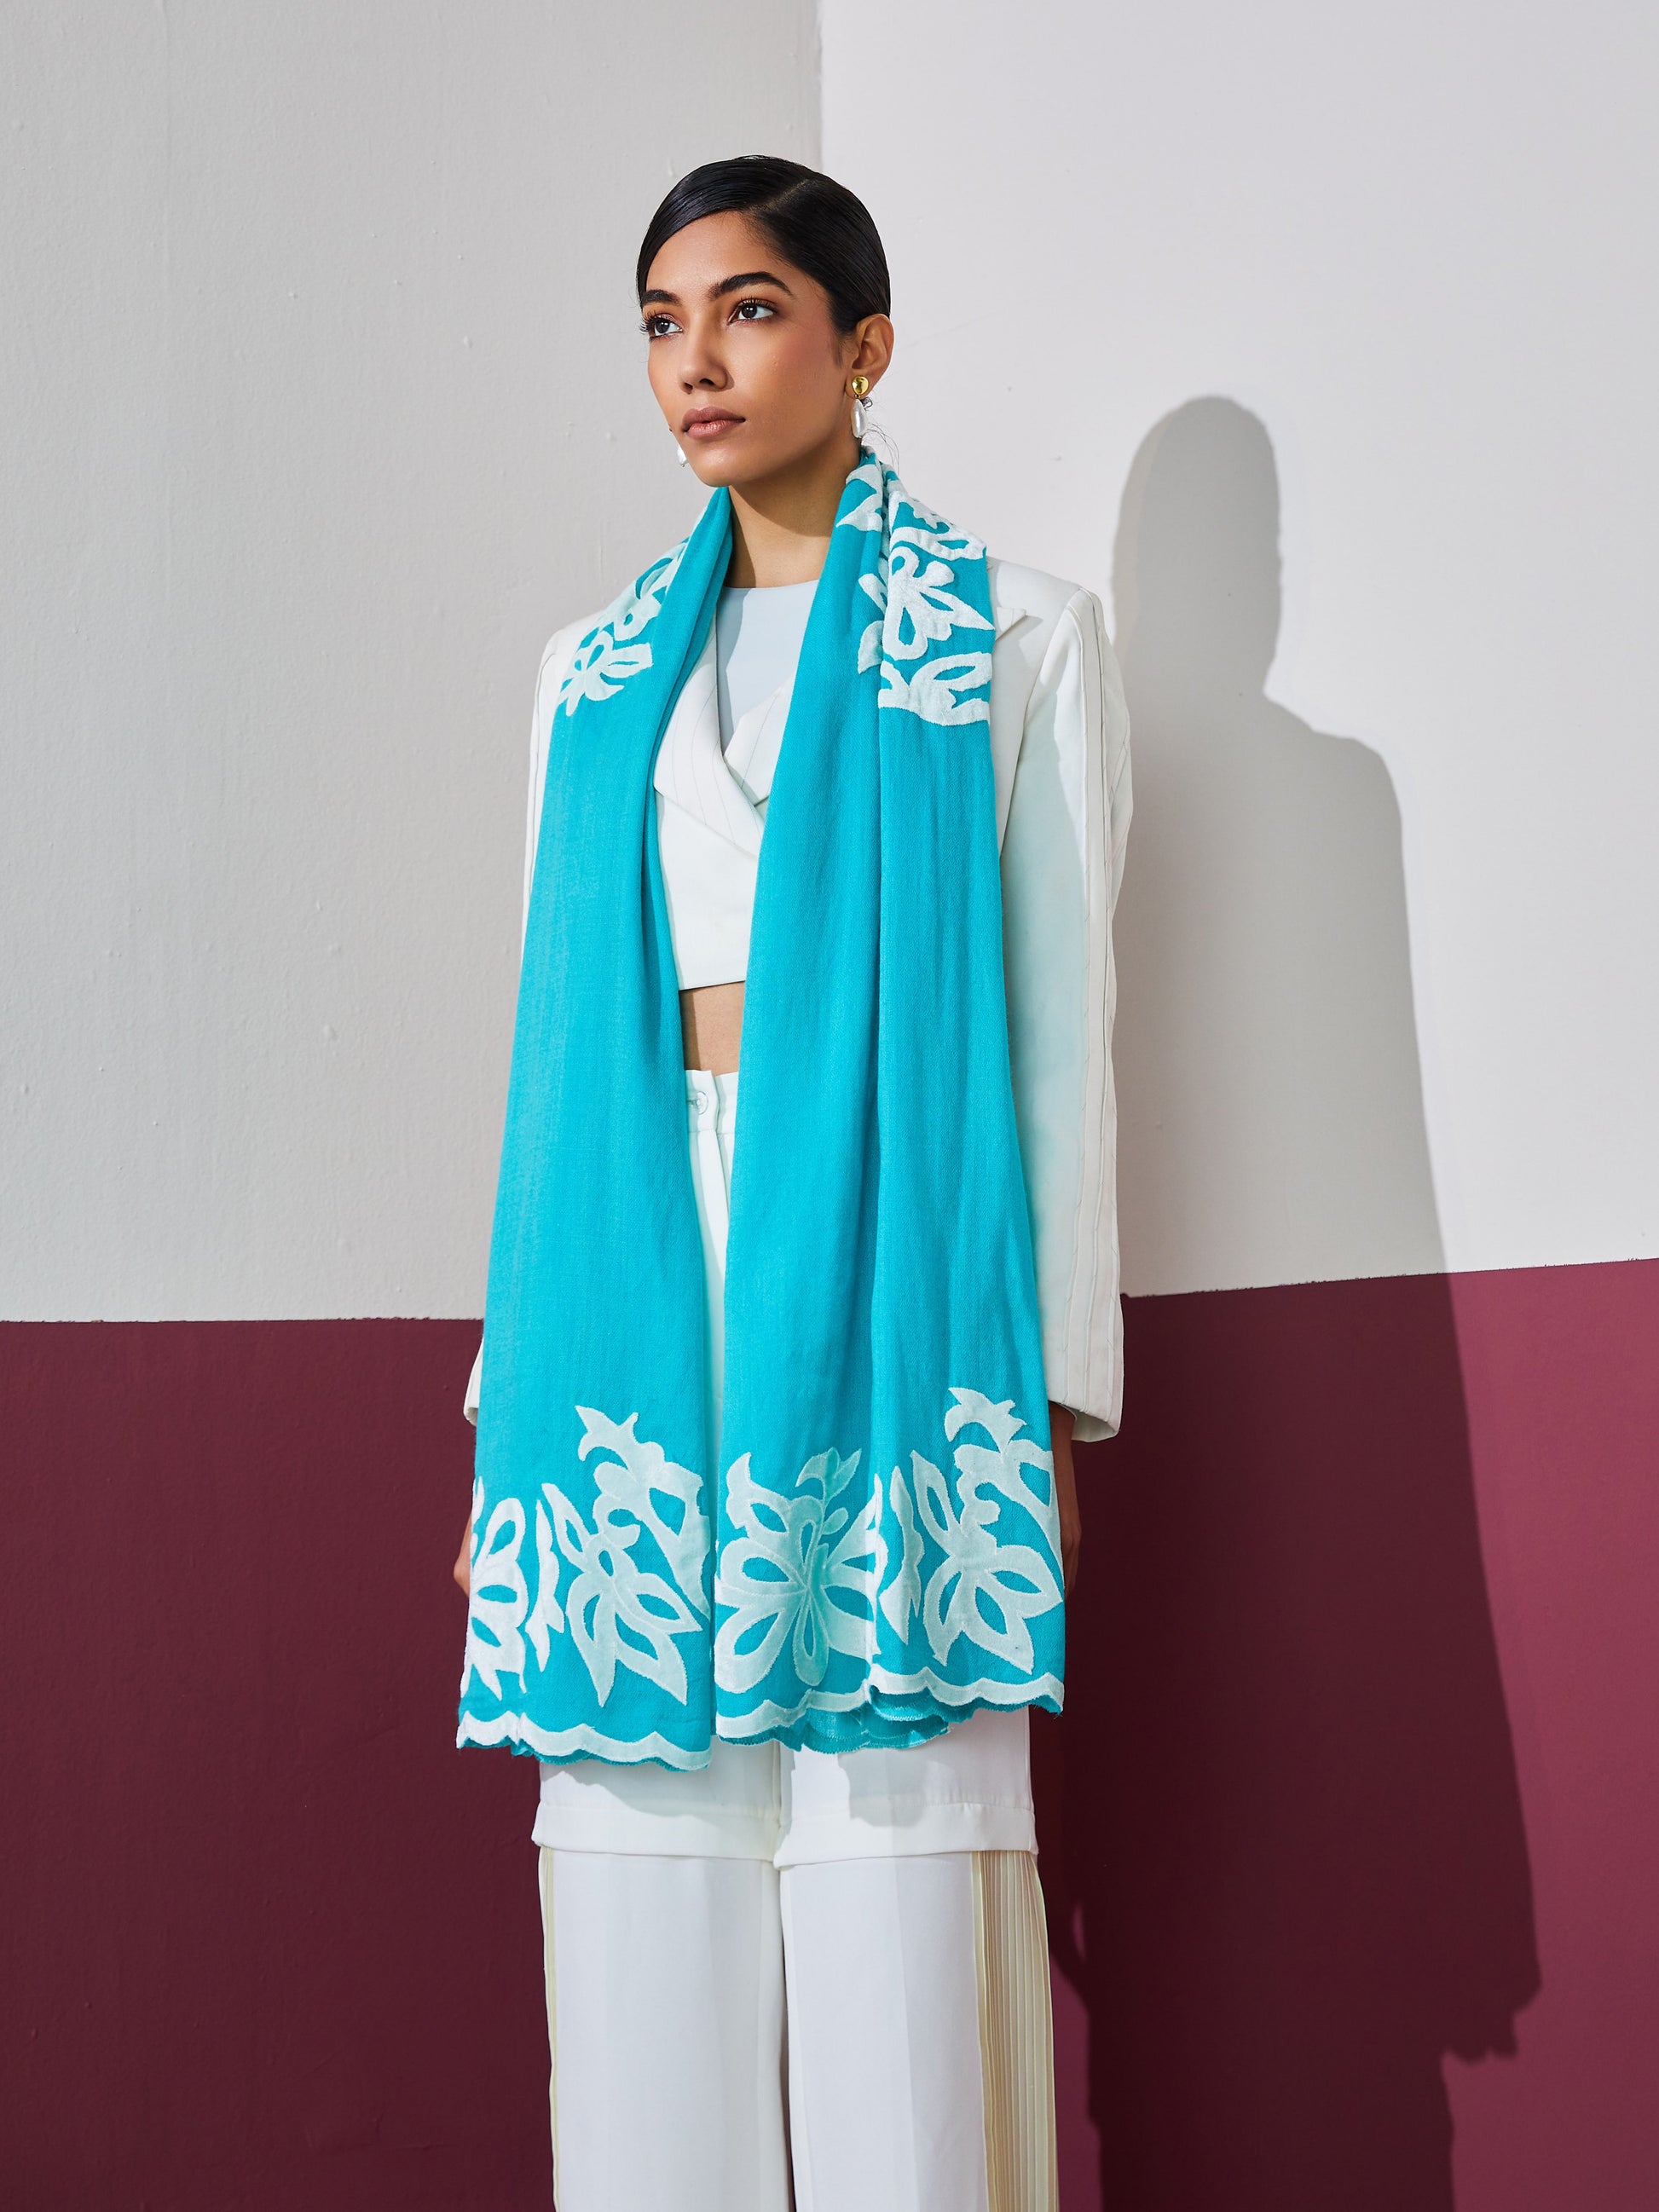 Model is wearing a firozi blue Velvet affair cashmere stole with white applique from Shaza.